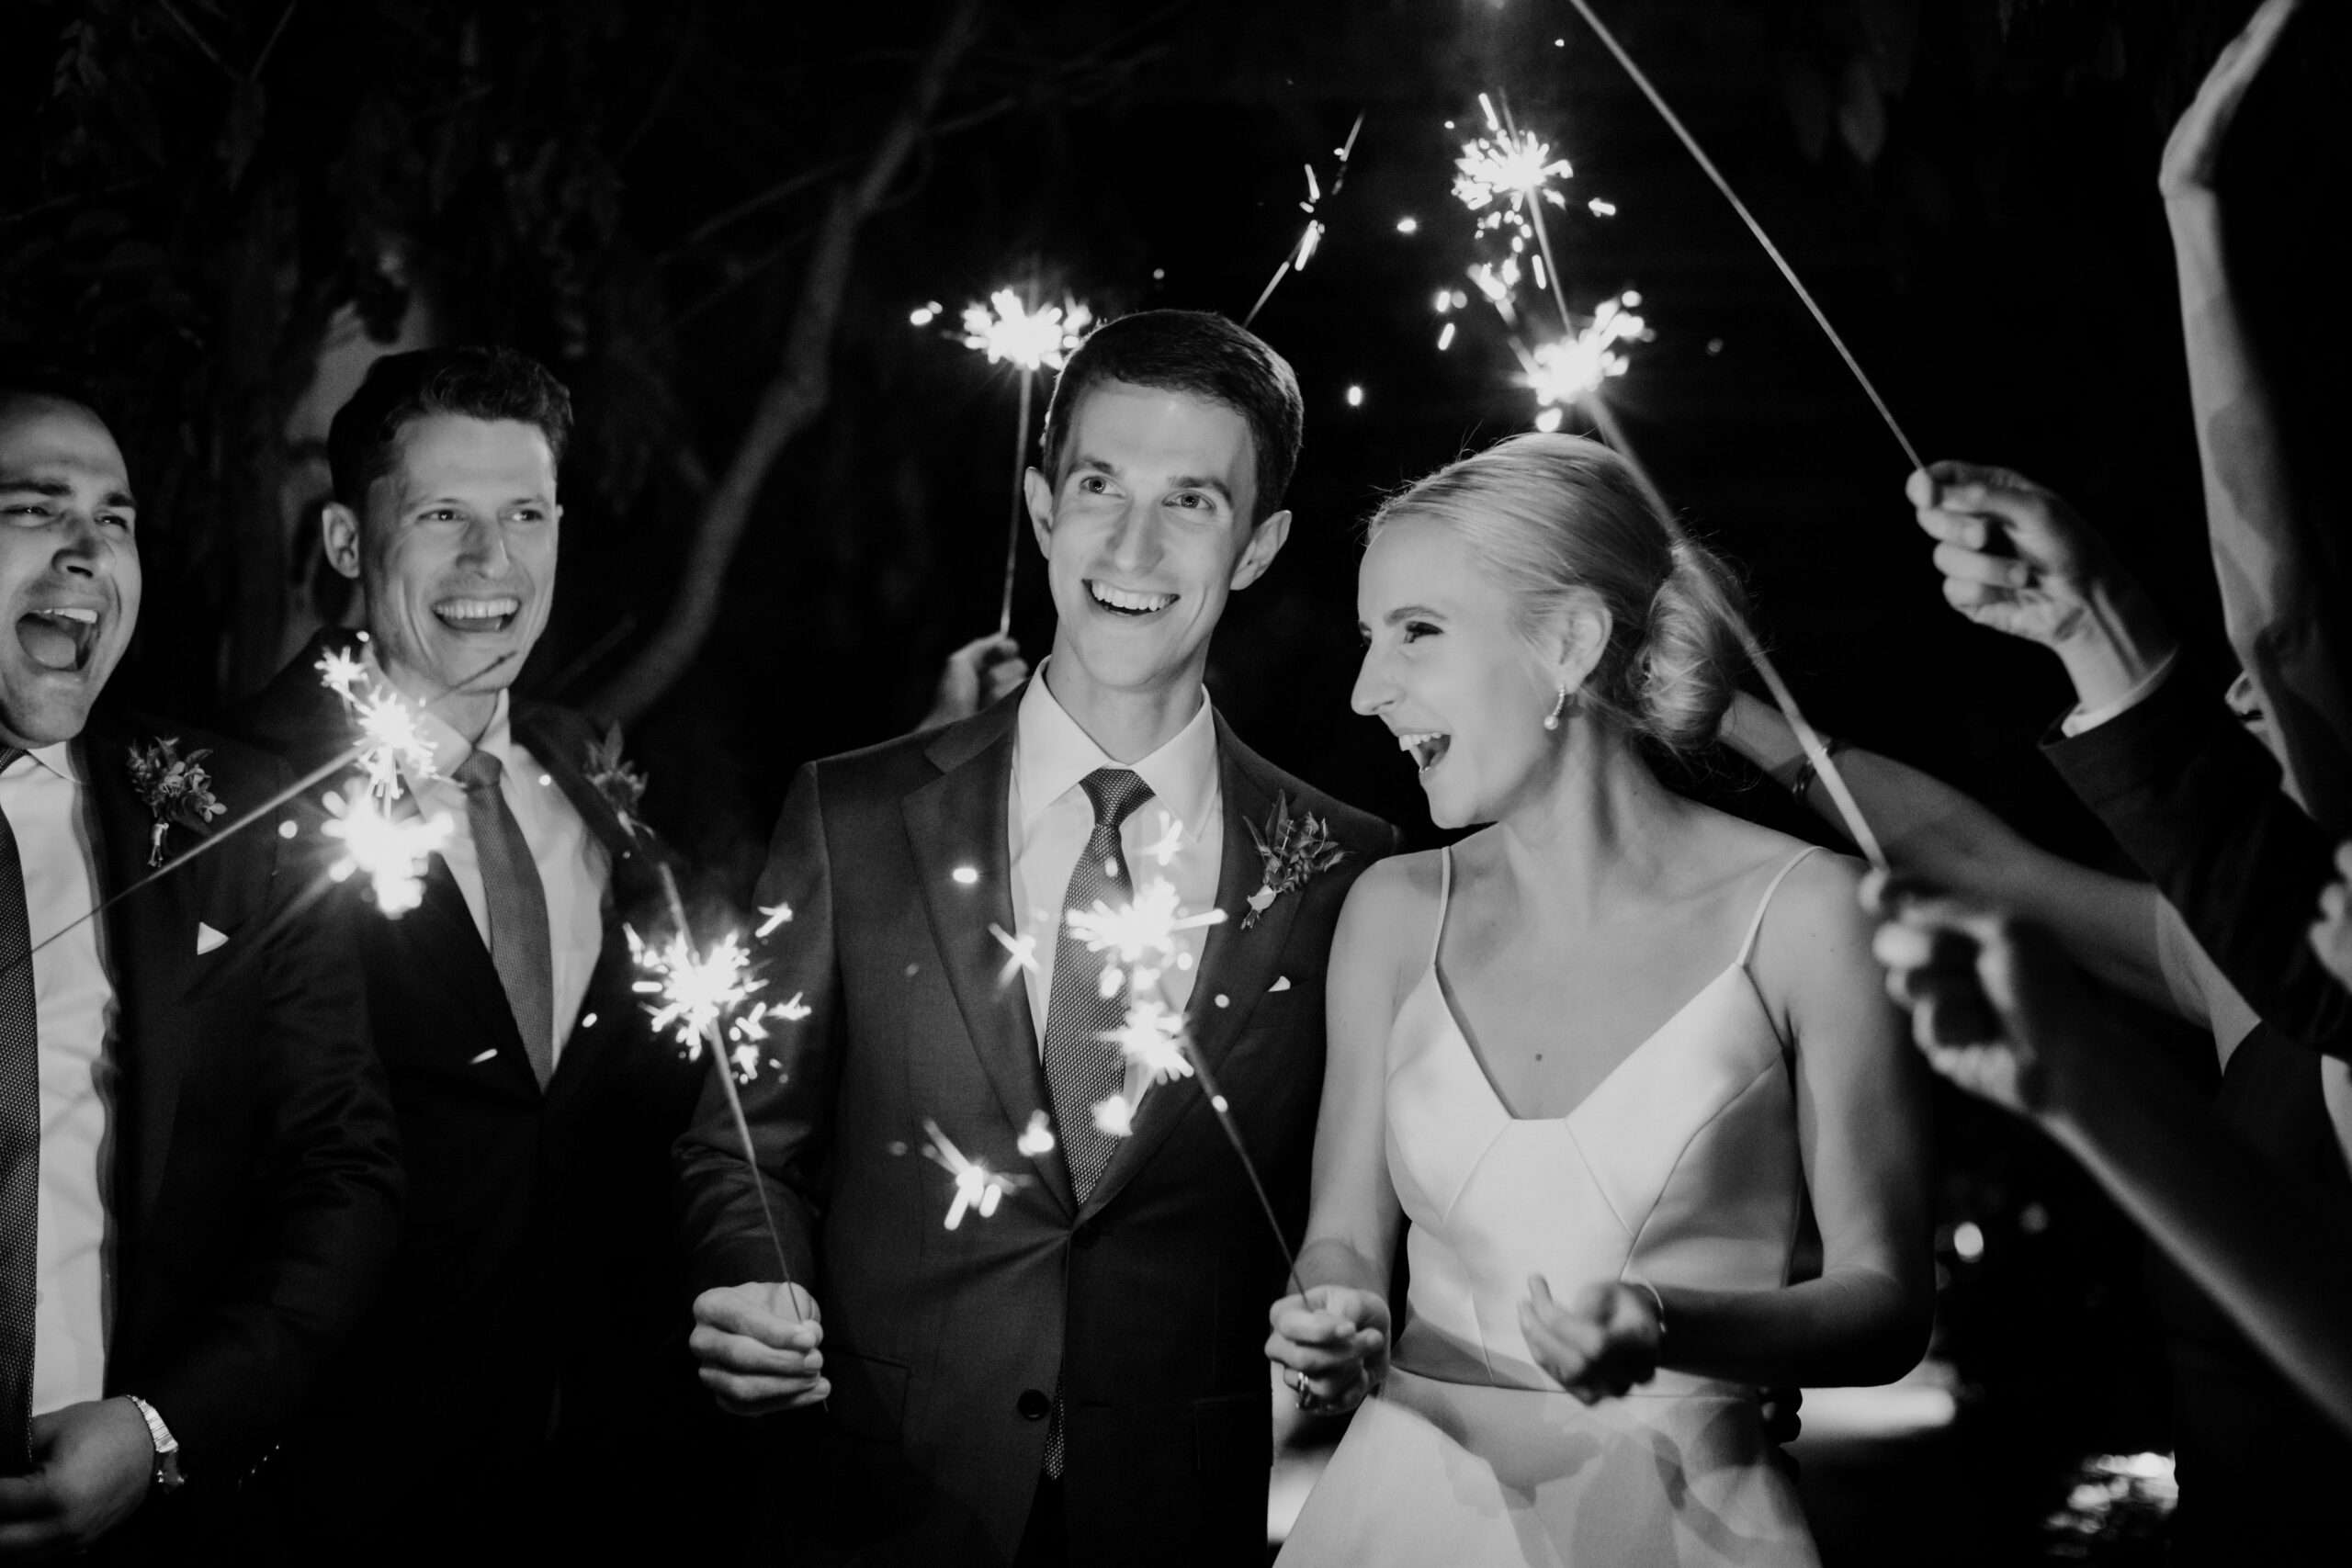 Stunning bride and groom exit under the sparklers after their New York winery wedding